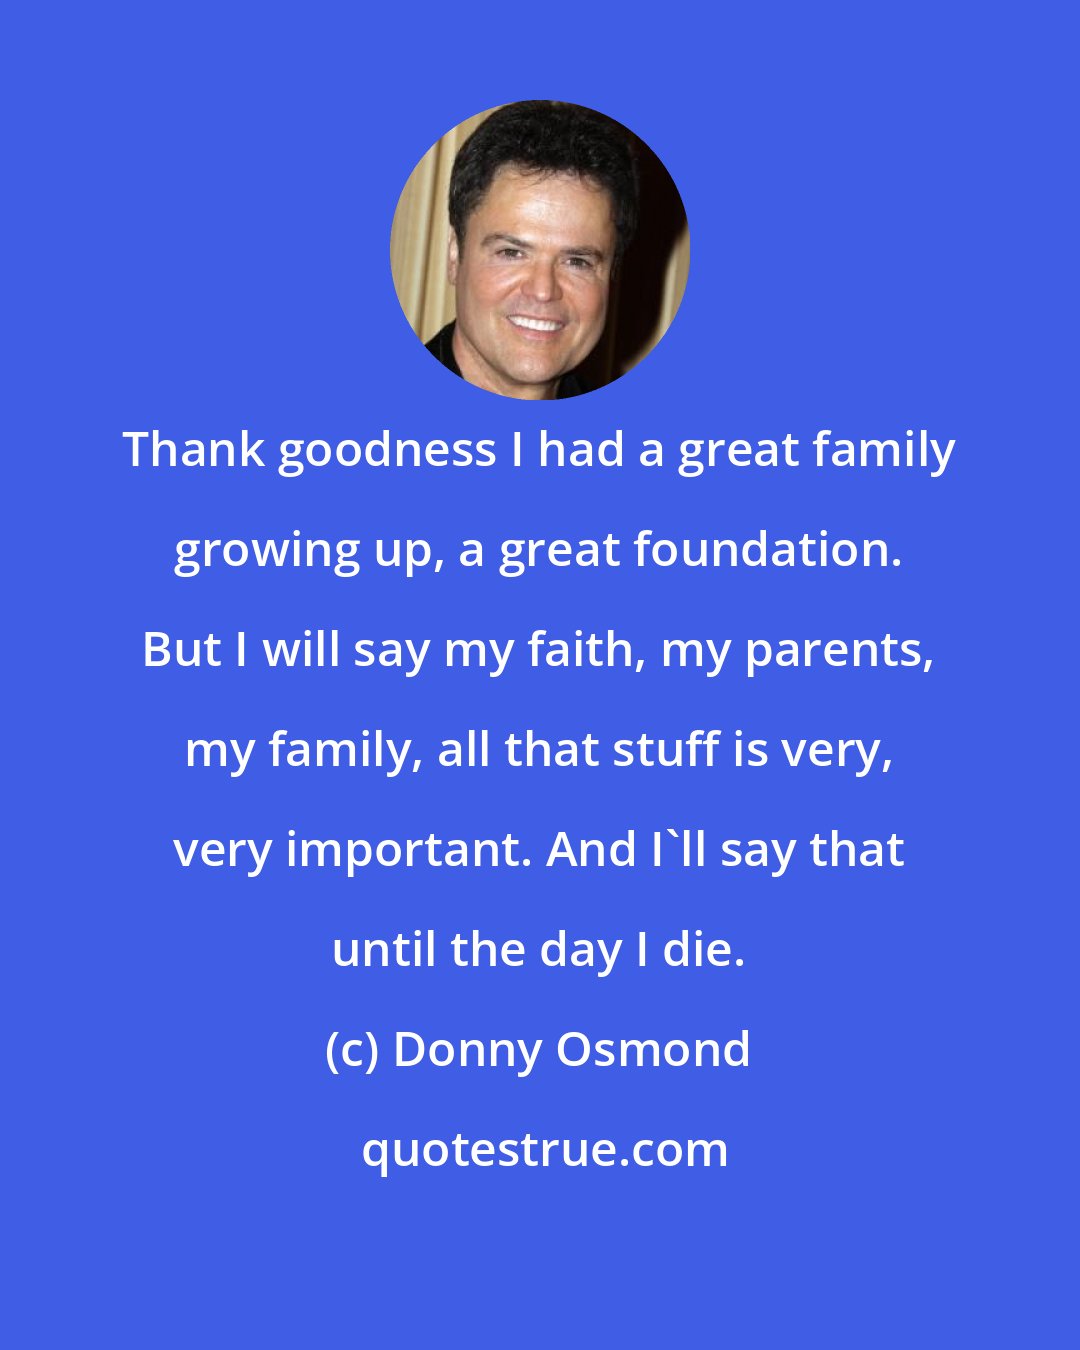 Donny Osmond: Thank goodness I had a great family growing up, a great foundation. But I will say my faith, my parents, my family, all that stuff is very, very important. And I'll say that until the day I die.